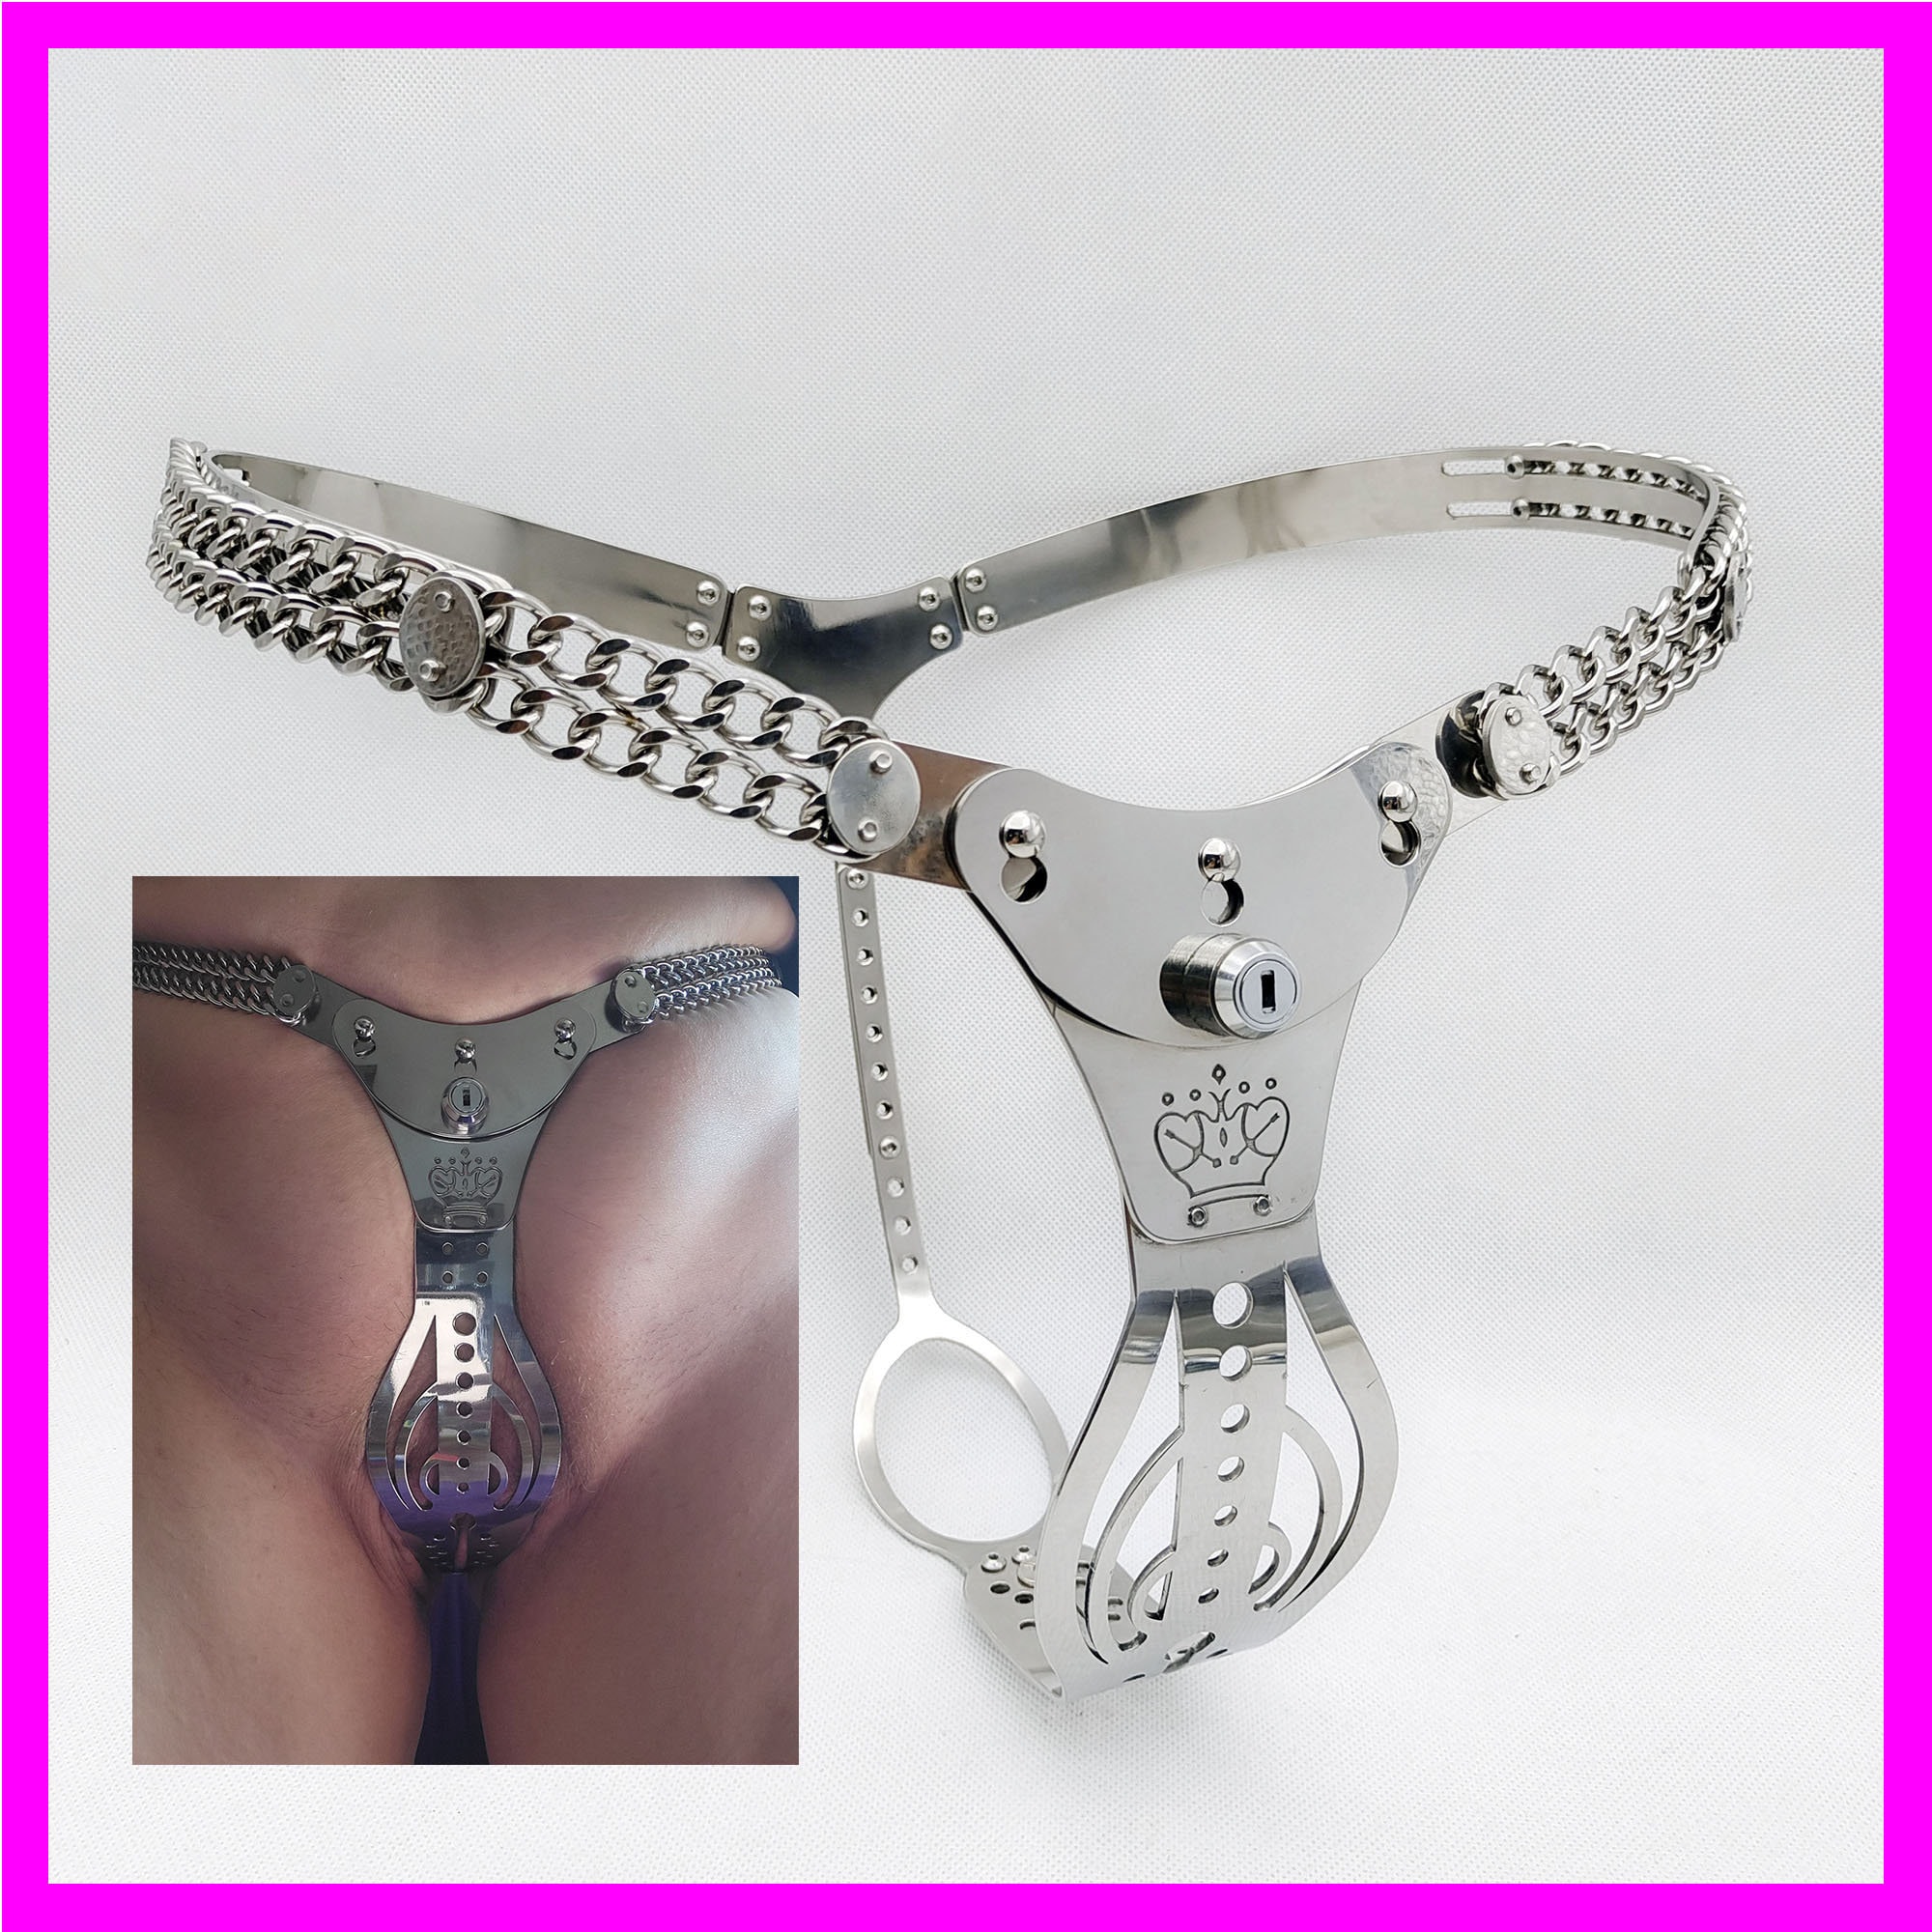 andres de la guardia recommends Anal Only Chastity Belt